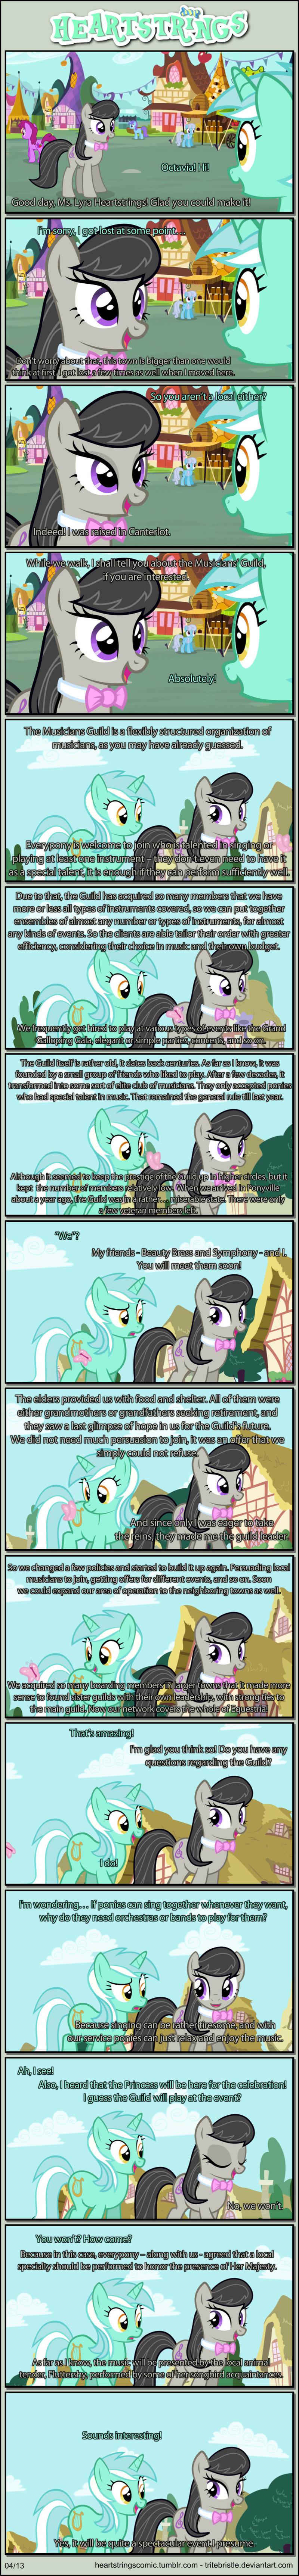 Heartstrings - Chapter 4 / Pages 13 - 25 - Canterlot Comics